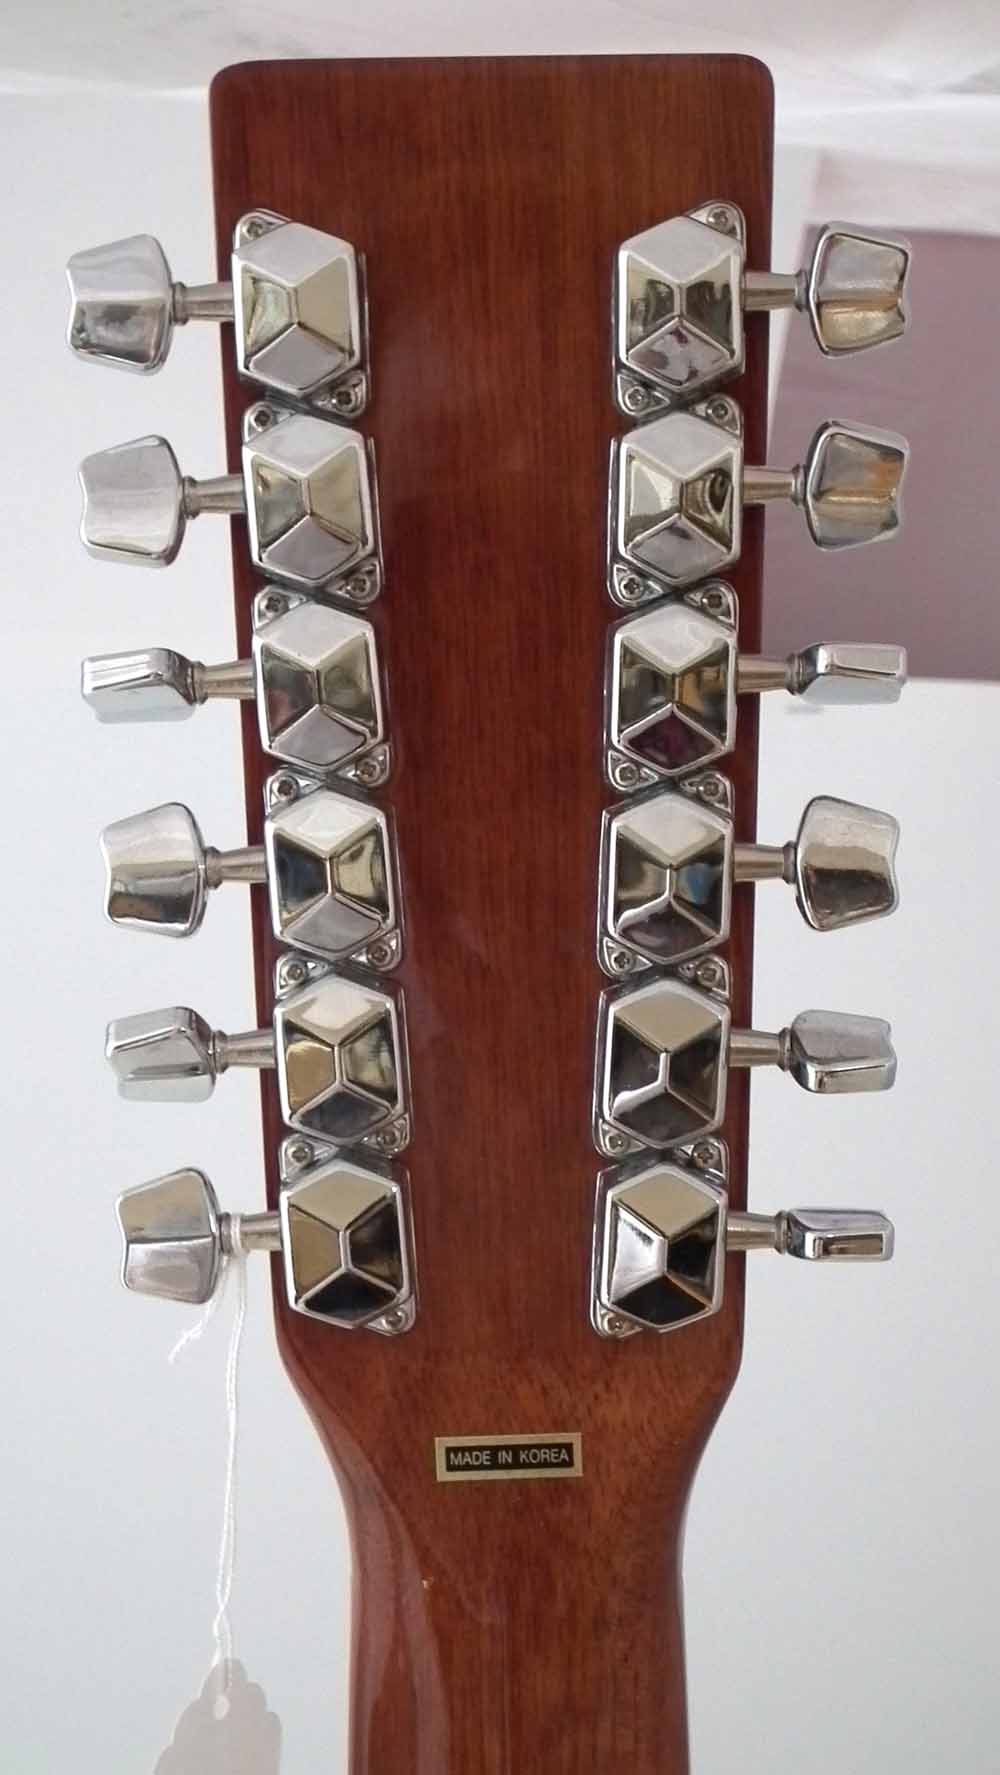 Vintage 12 String dreadnought guitar, serial number E400-12-N with mahogany back and sides. - Image 6 of 7